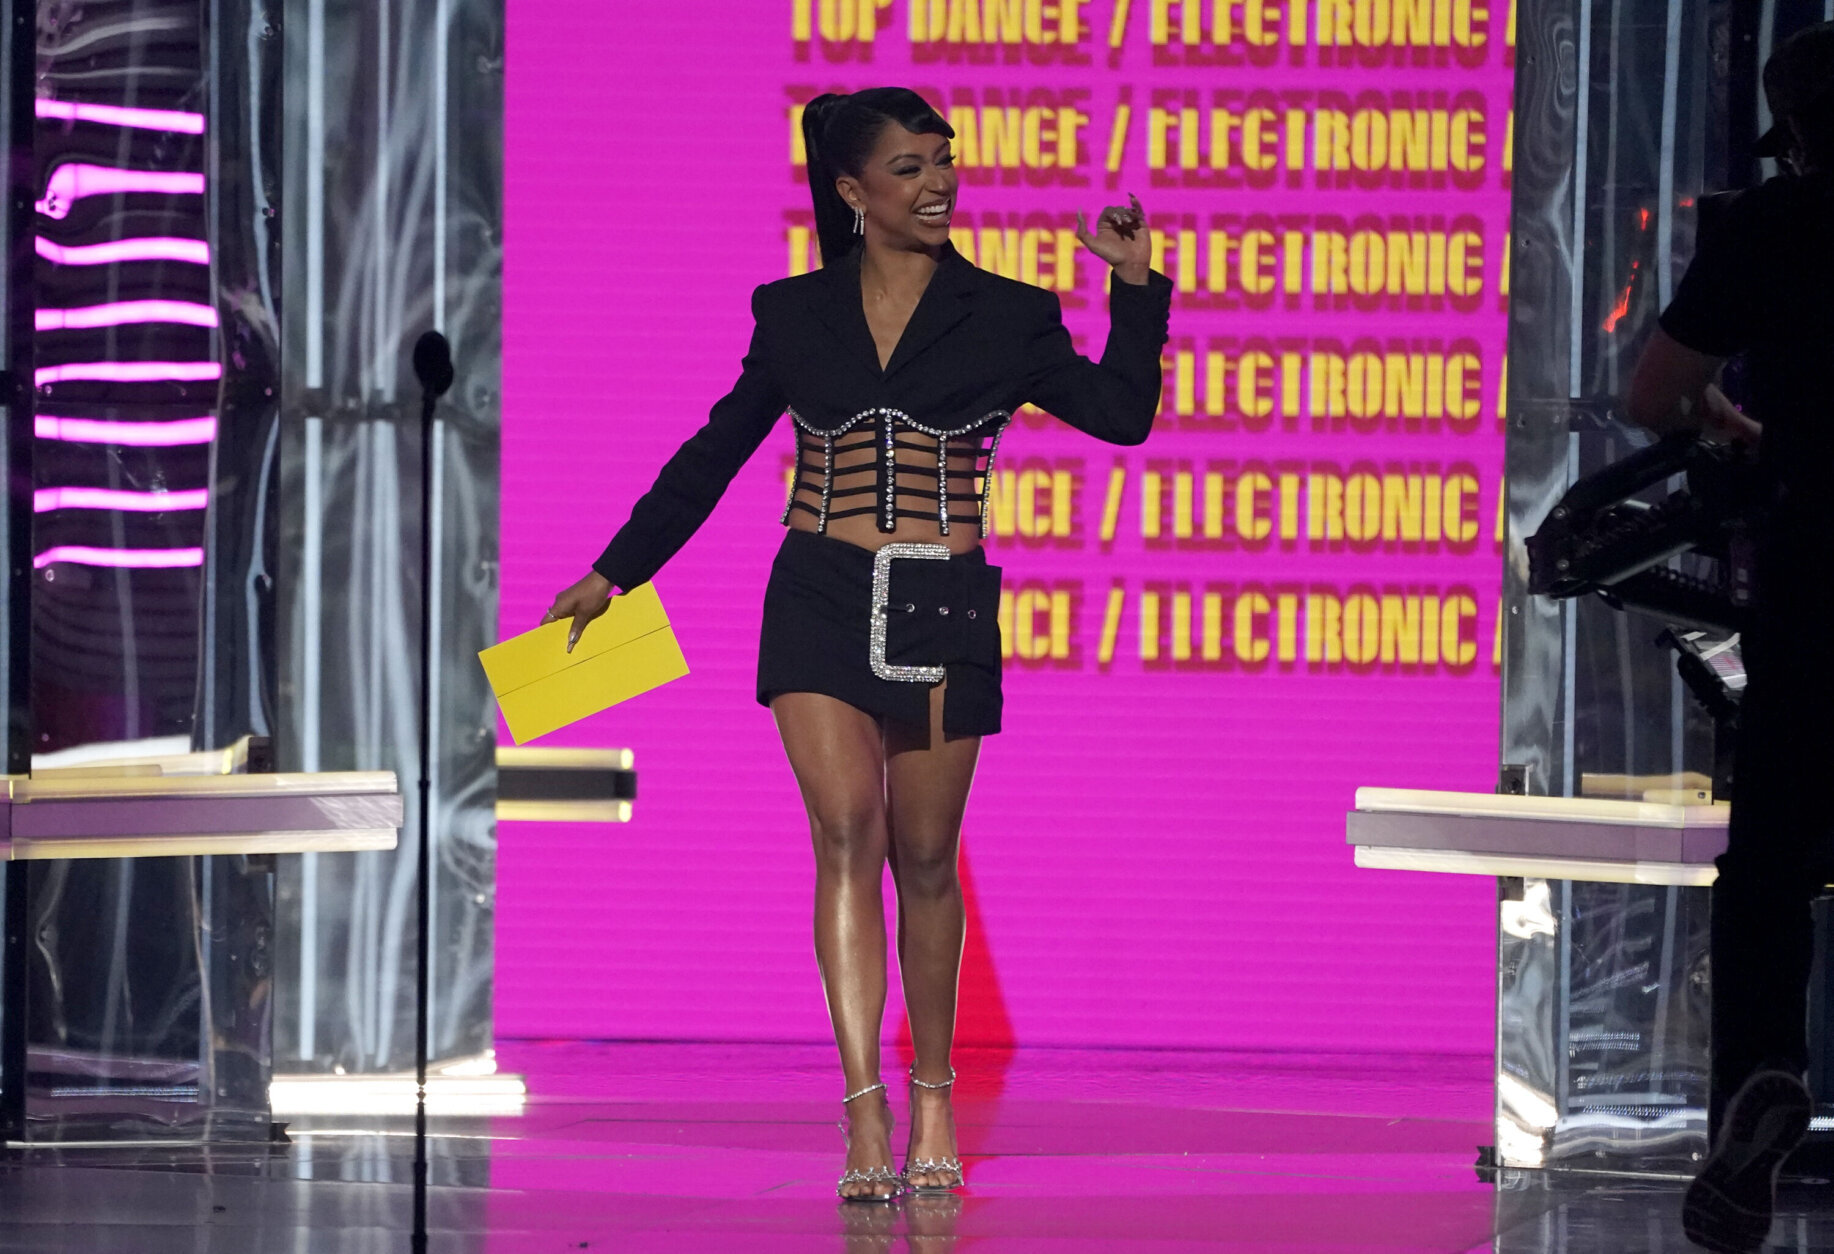 Liza Koshy walks onstage to present the award for Top Dance/Electronic Album at the Billboard Music Awards on Sunday, May 15, 2022, at the MGM Grand Garden Arena in Las Vegas. (AP Photo/Chris Pizzello)